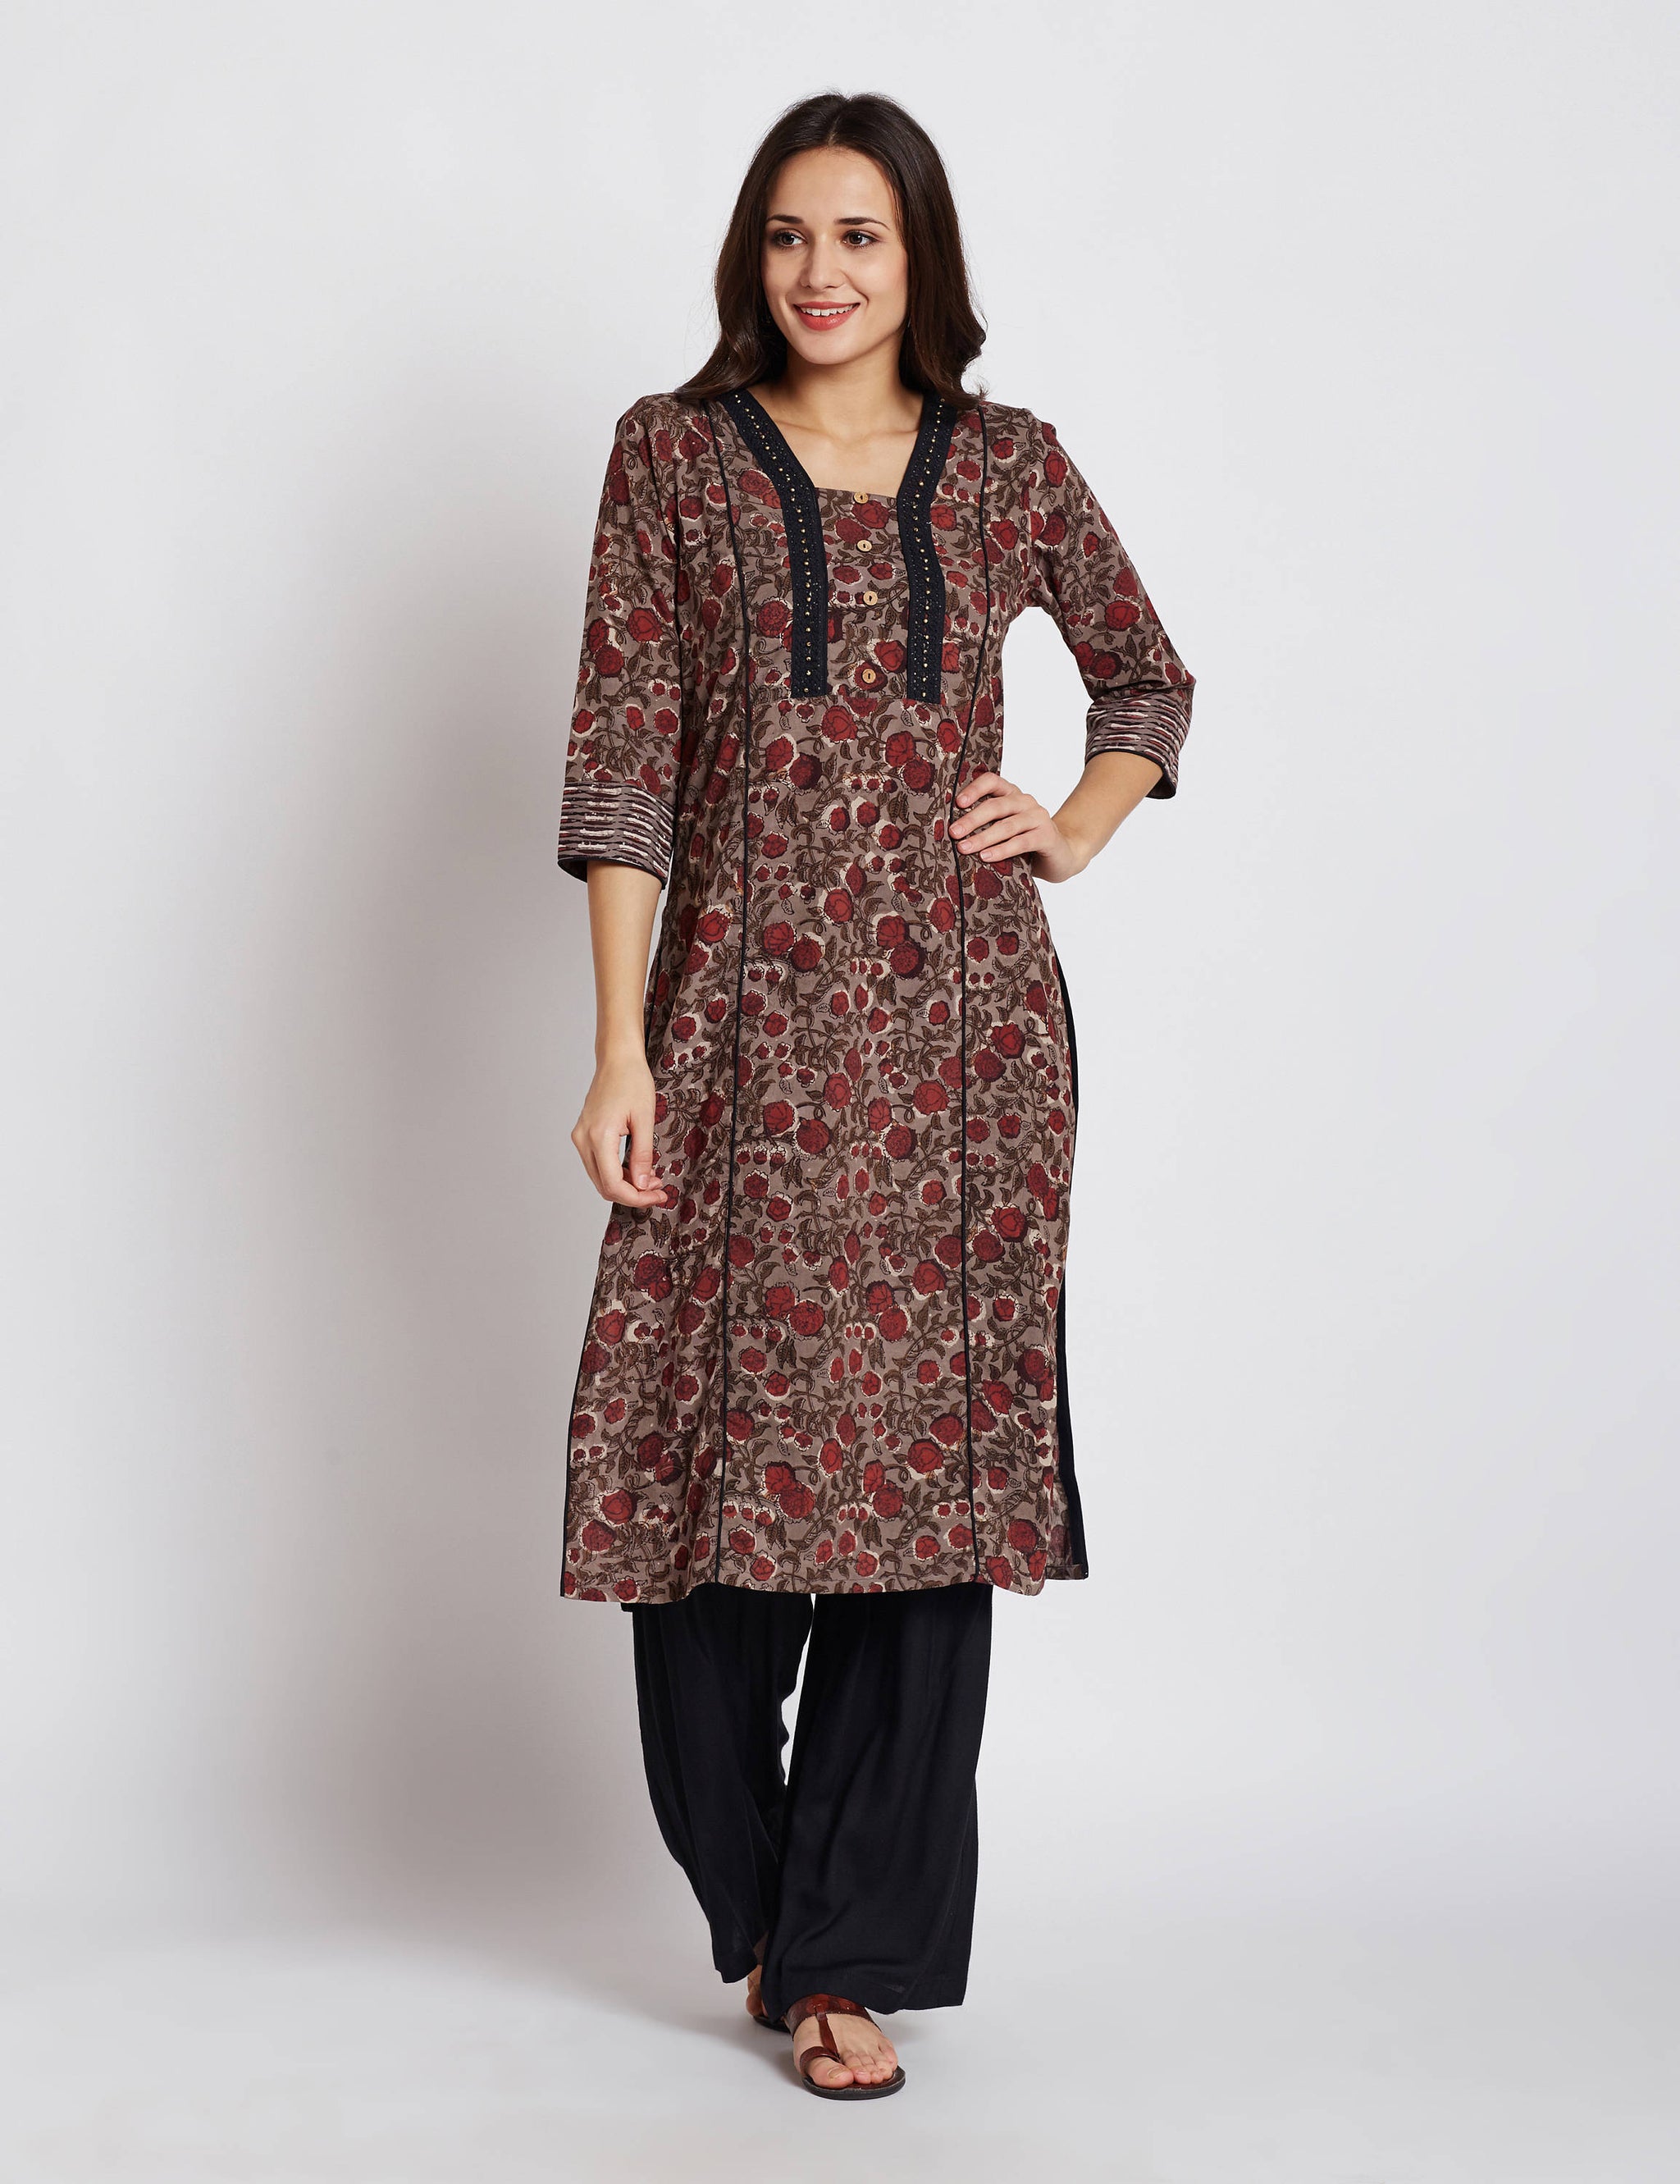 Hand block dabu printed ethnic long Indian kurta with trims on front and neck design with beads & lace